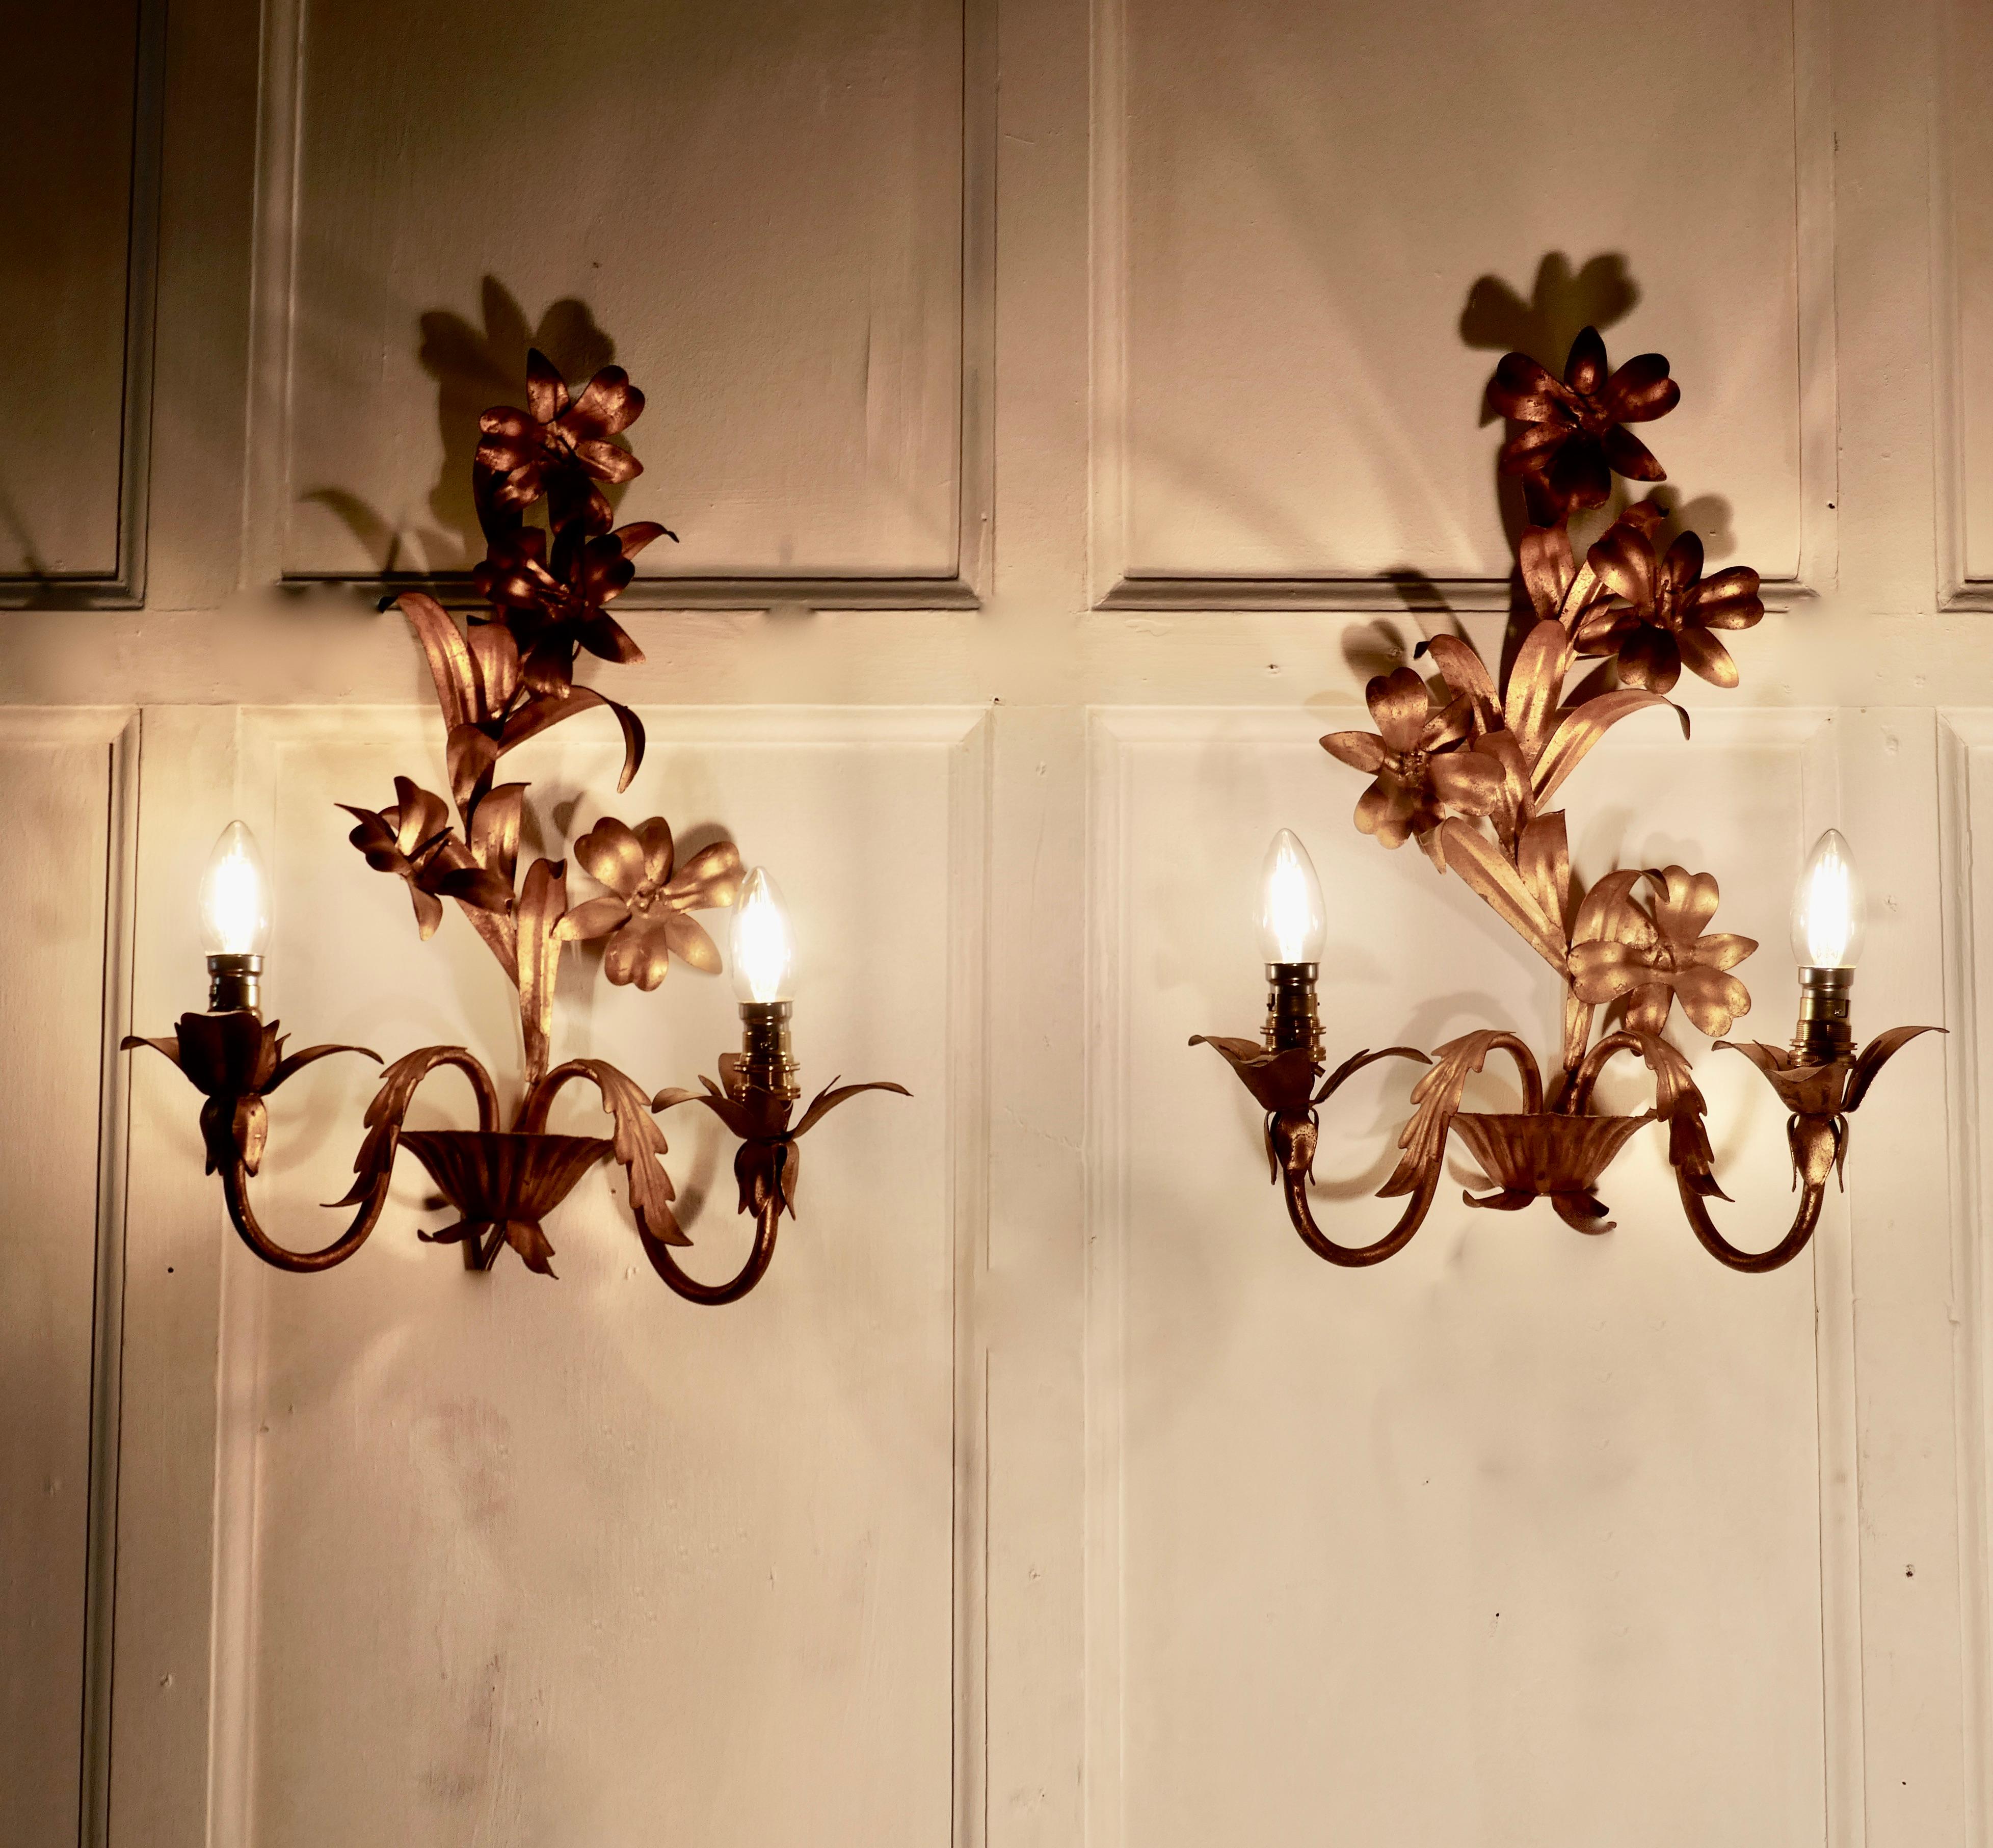 A pair of French two branch toleware gilded wall lights

These are very pretty two branch wall lights, the brass sconces are decorated with flowers and curled leaves
The lights are all working and will need to be installed by an electrician
The